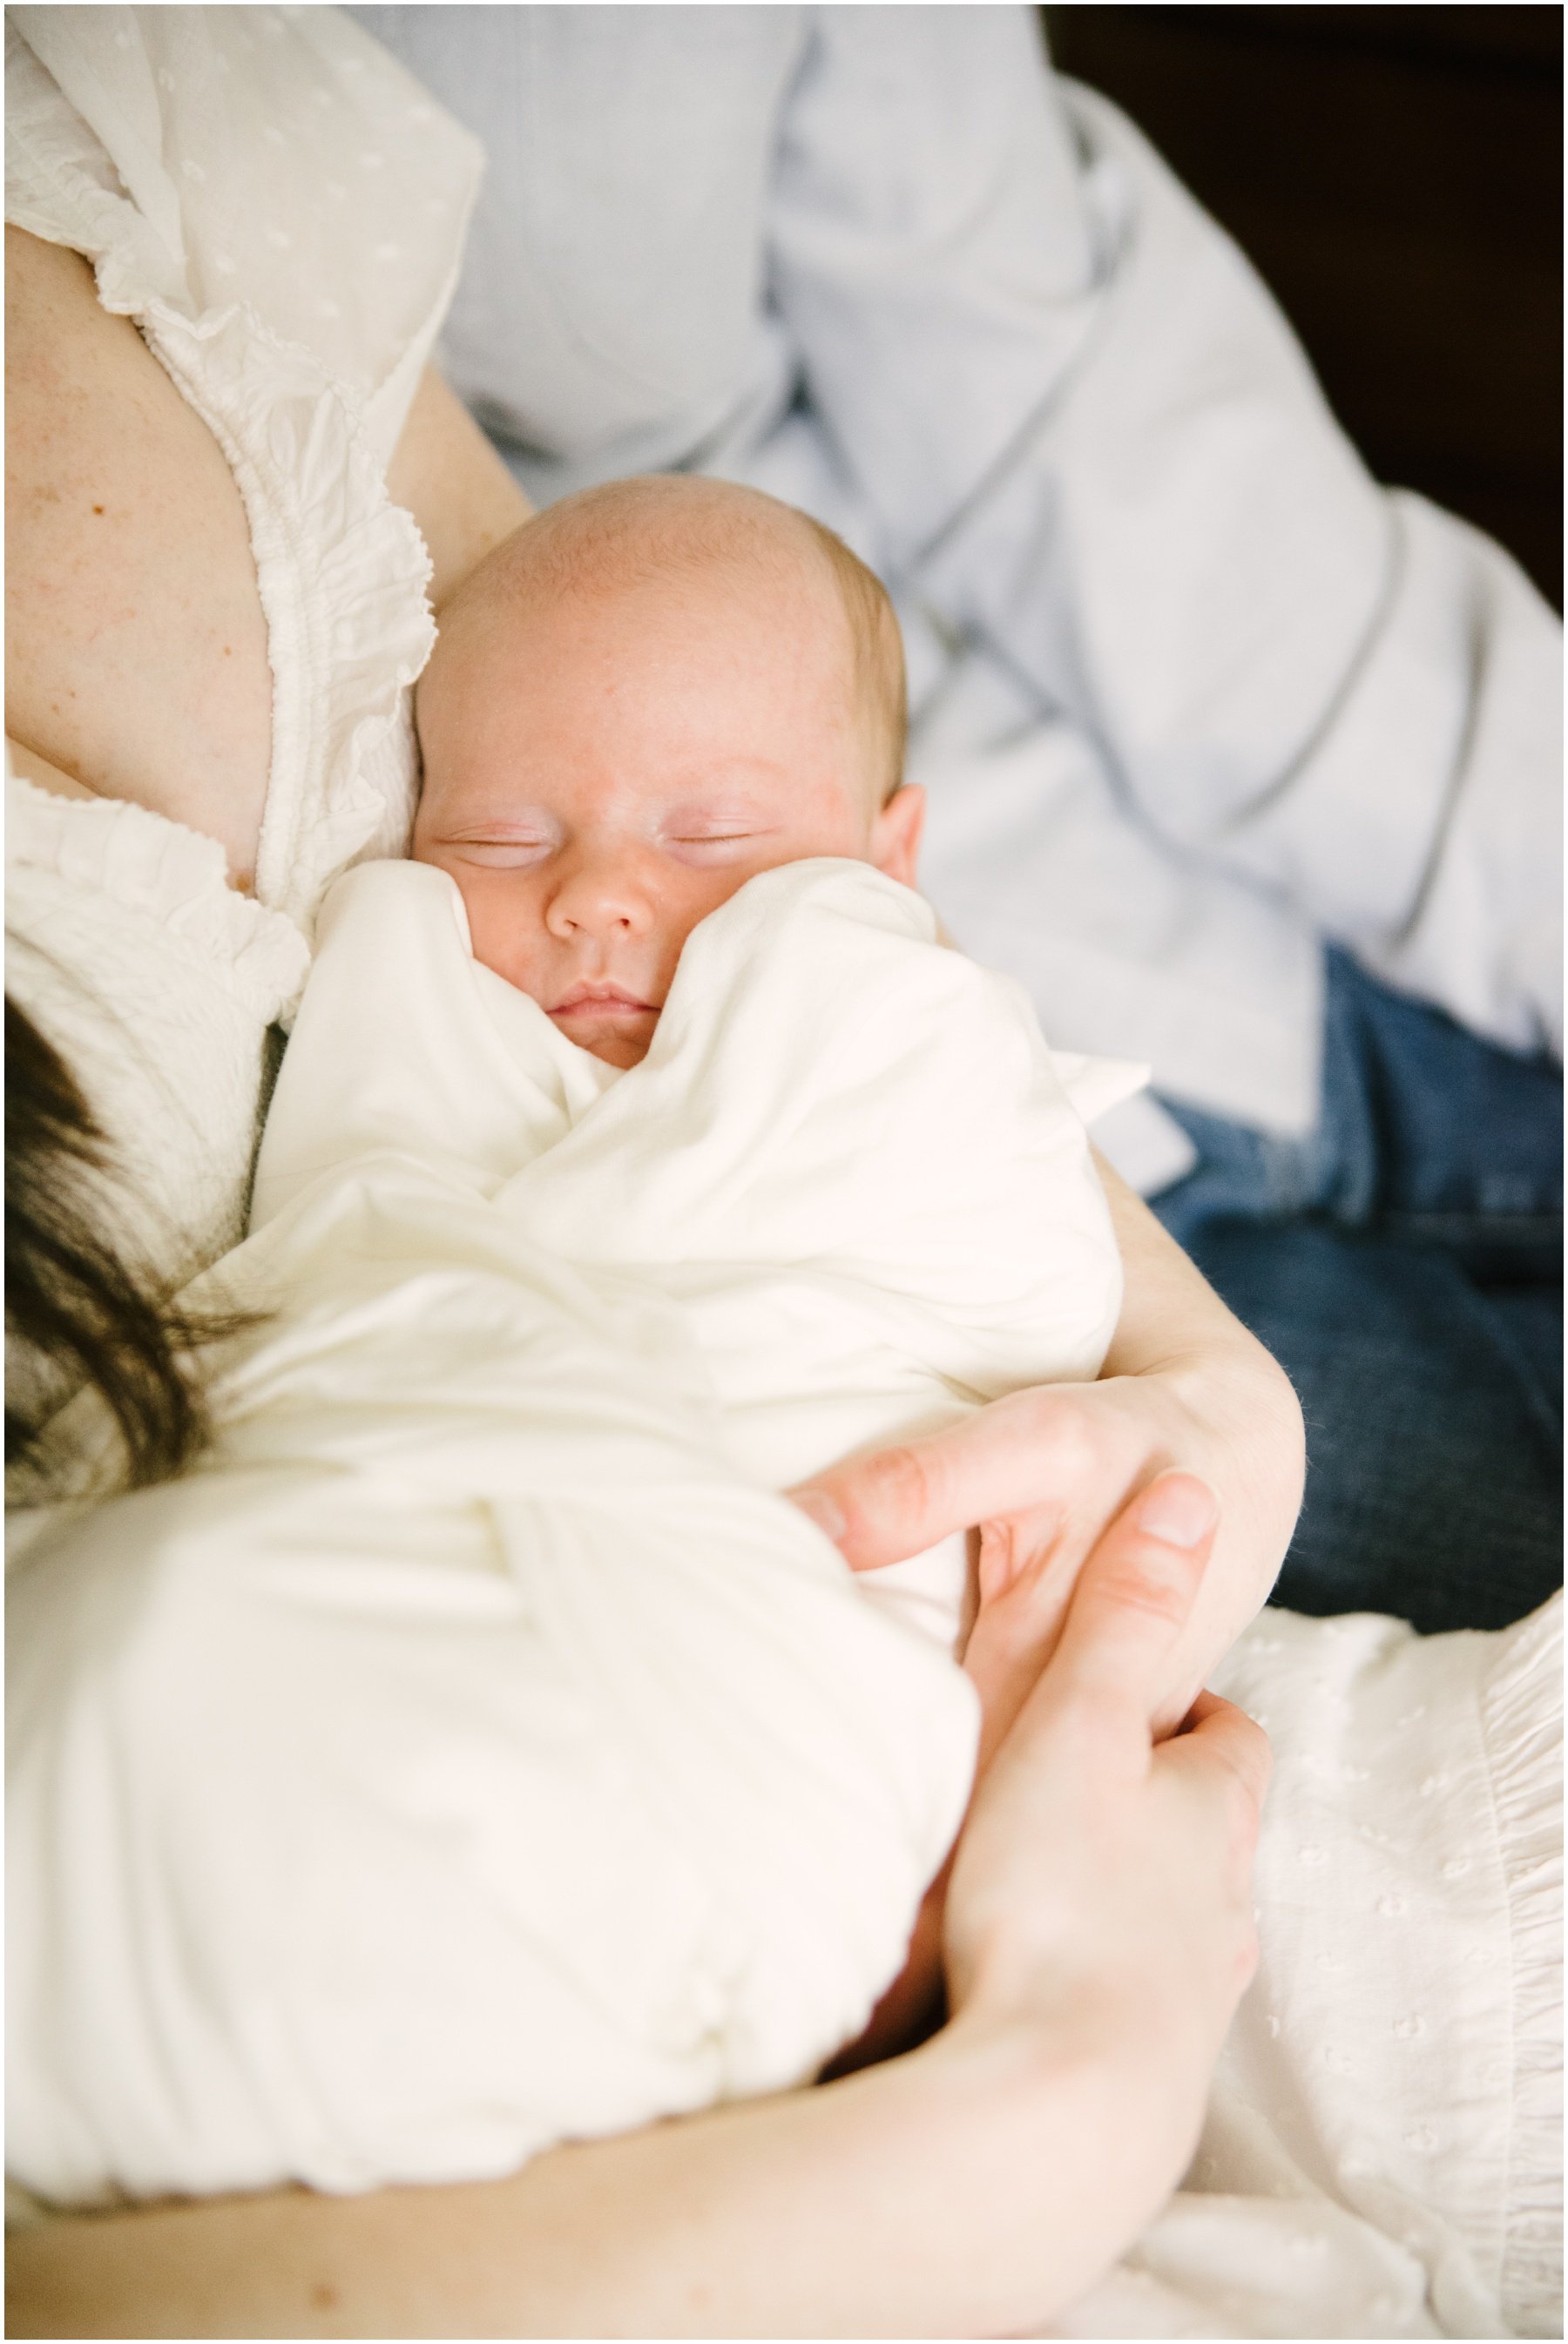 Sleeping baby being held by mom during newborn session | NKB Photo